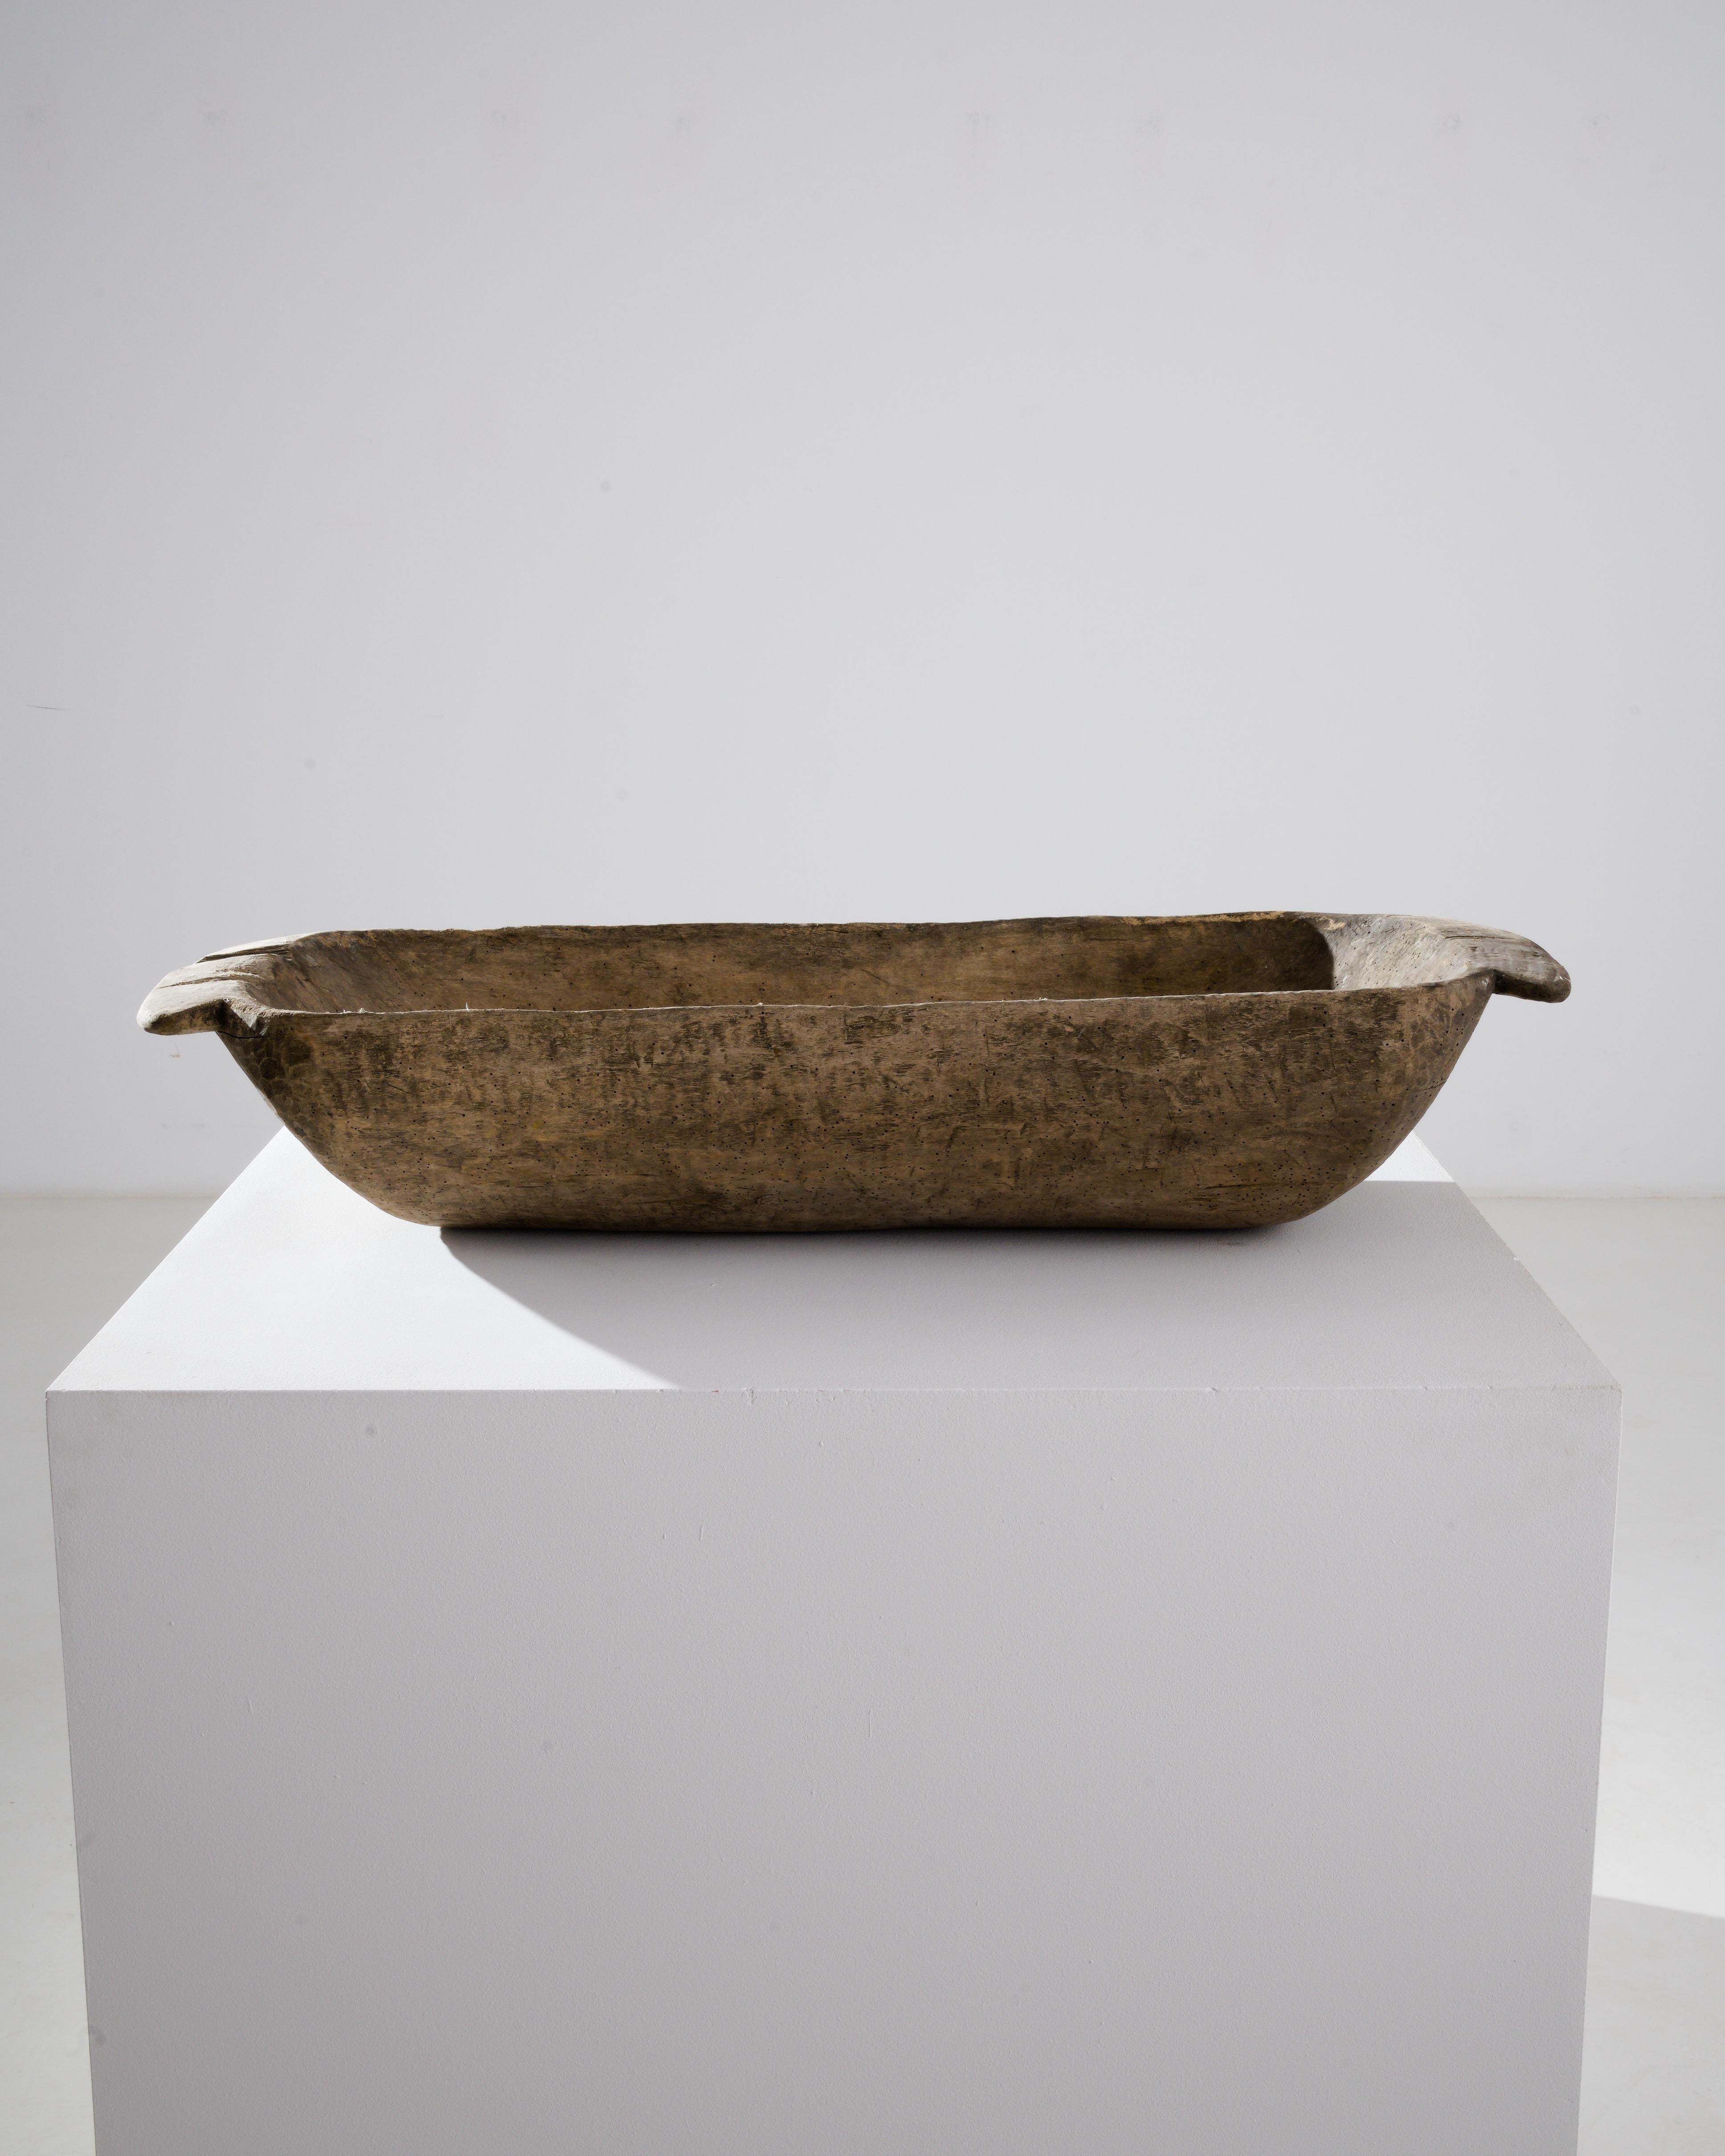 The simple form and tactile surface of this wooden bowl give it a timeless appeal. Made in Central Europe in the 1800s, the rough-hewn texture indicates that this piece was carved by hand from a single piece of wood, formerly used to store rising